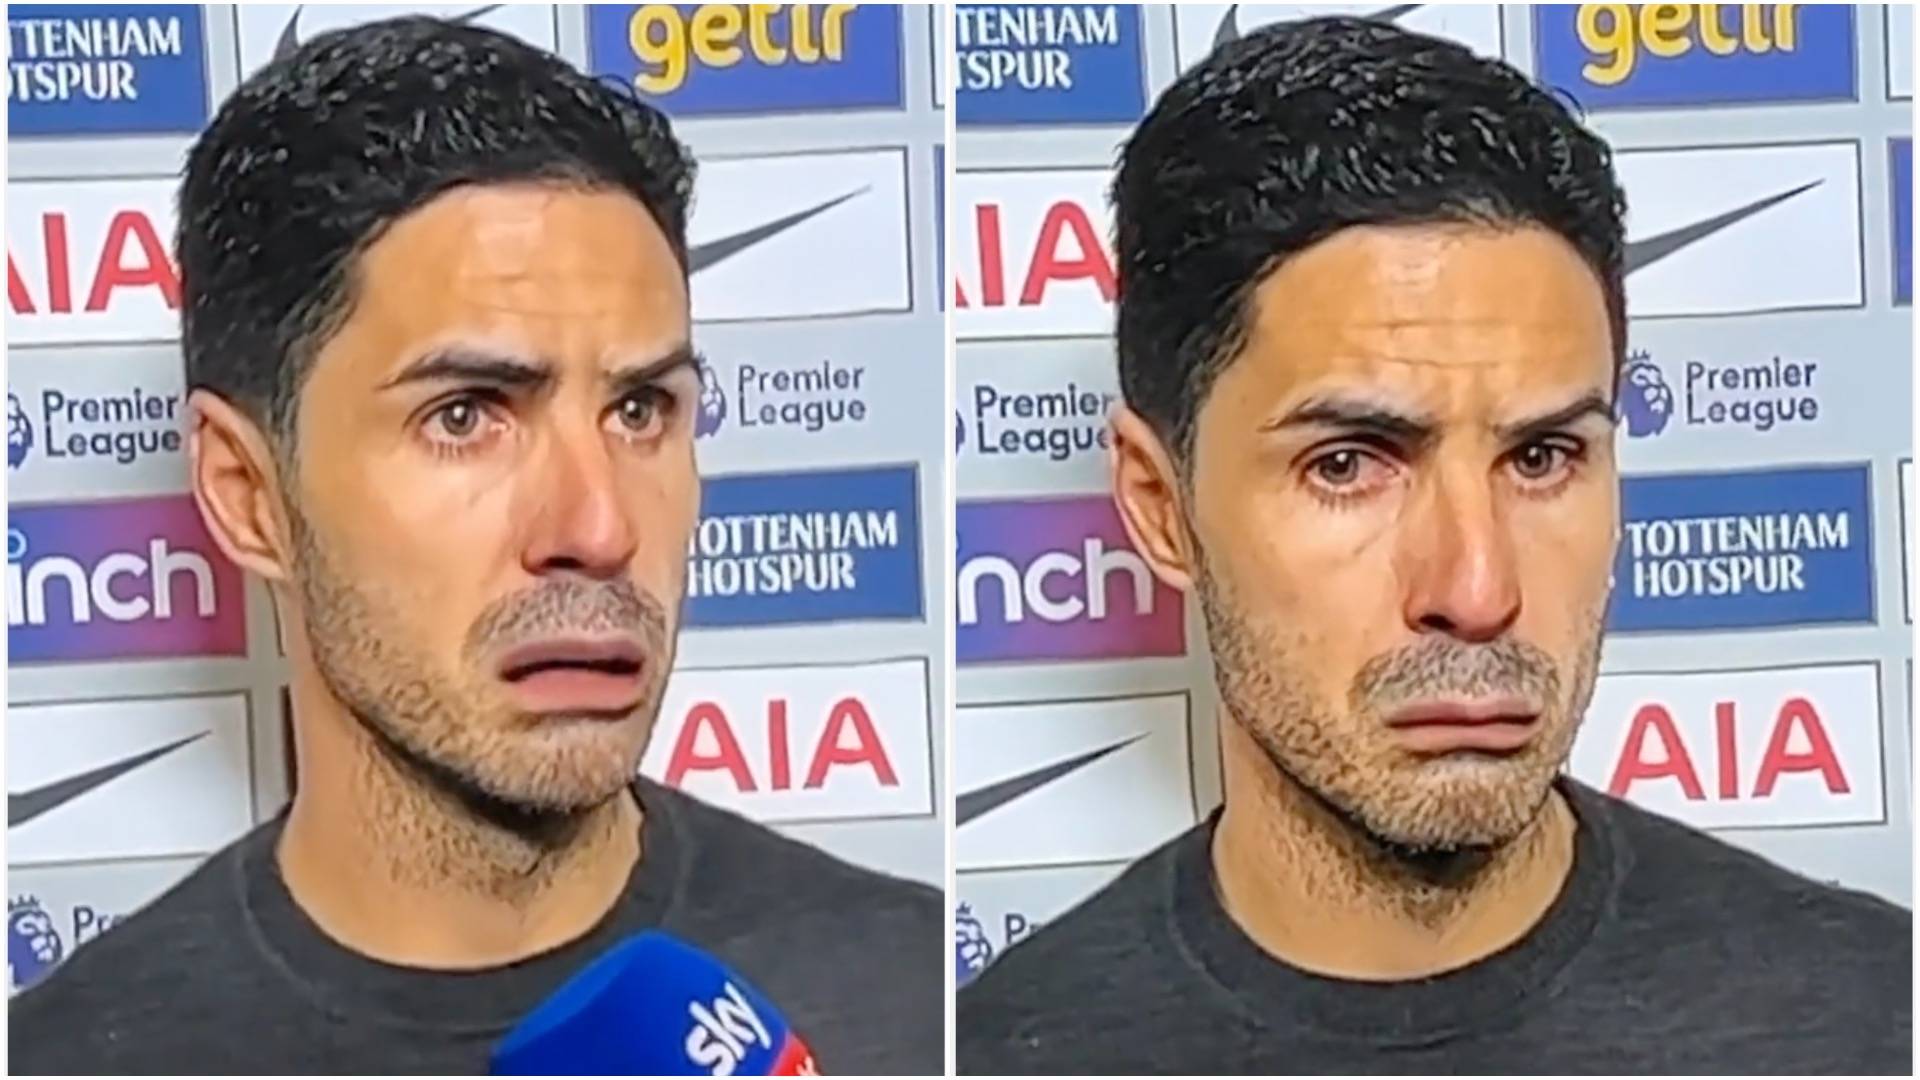 Mikel Arteta's post-match interview v Tottenham has been given the Snapchat filter treatment